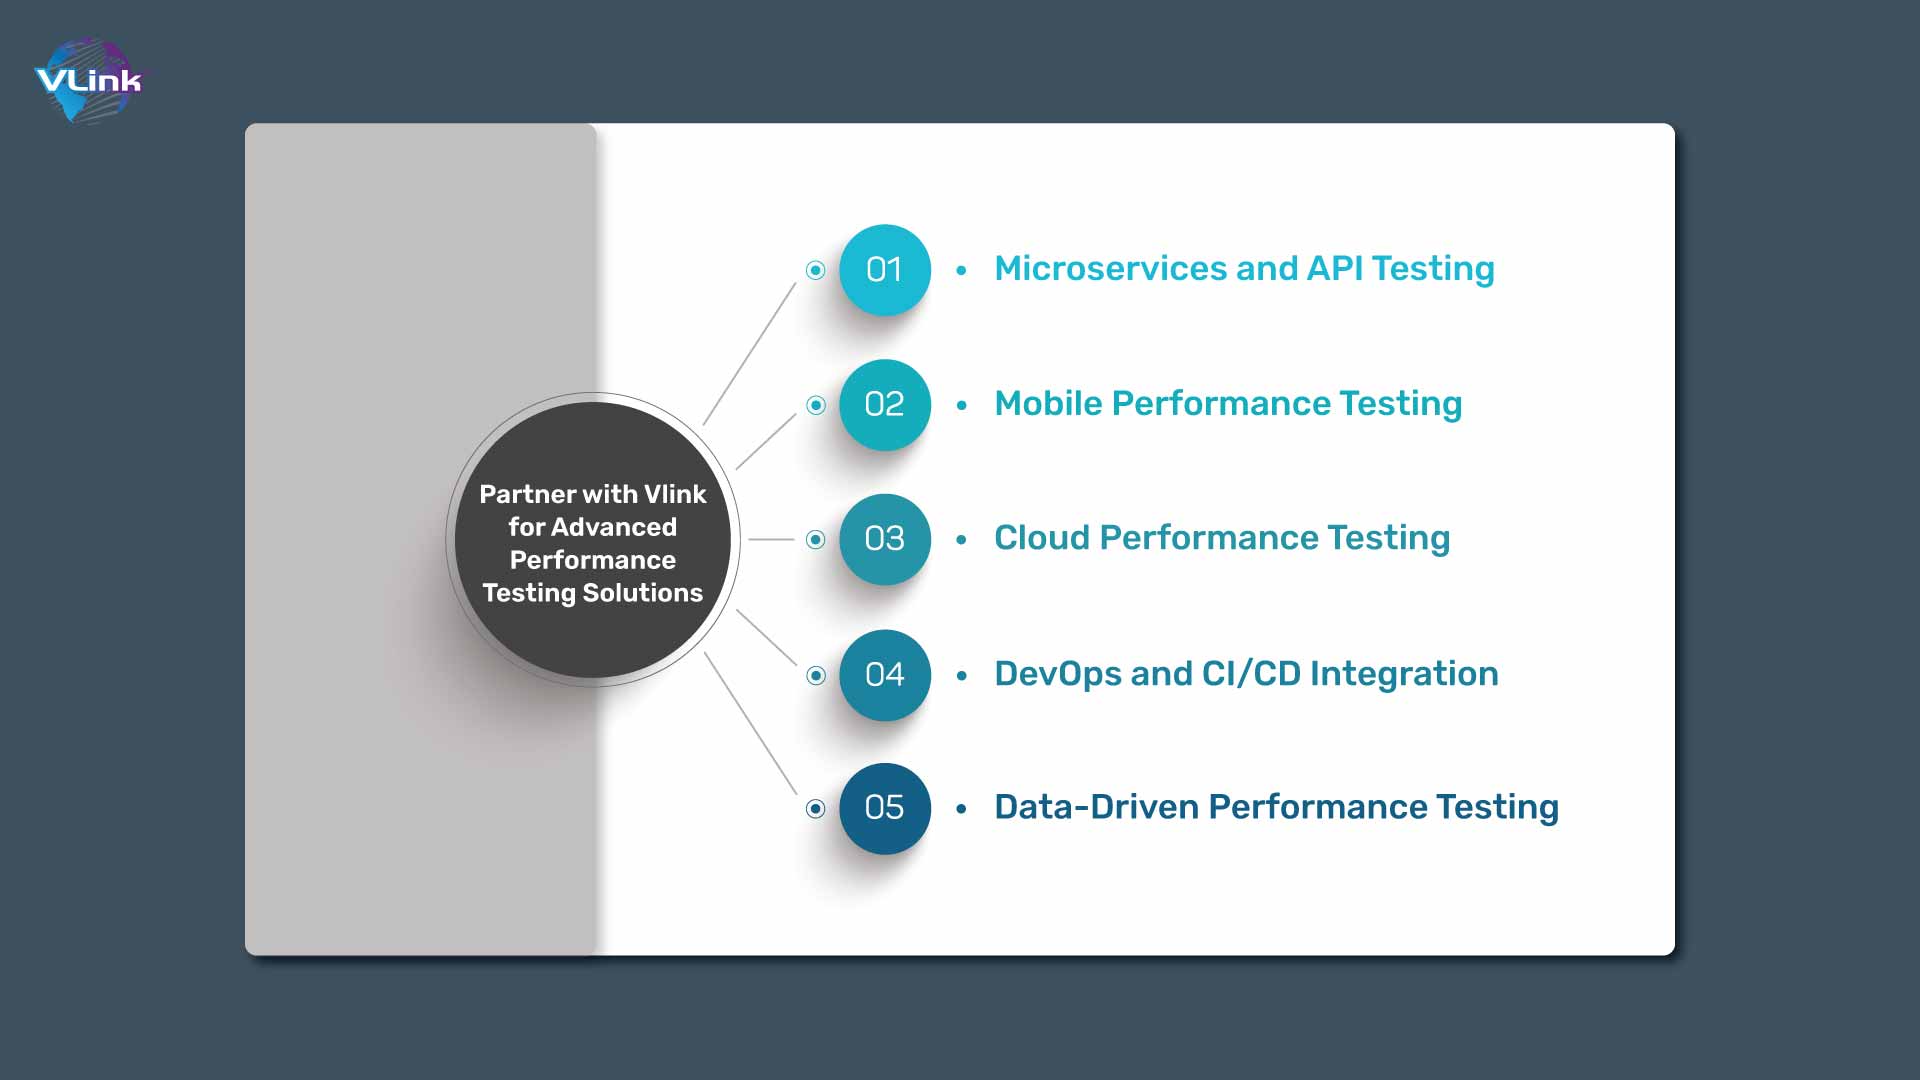 Partner with Vlink for Advanced Performance Testing Solutions